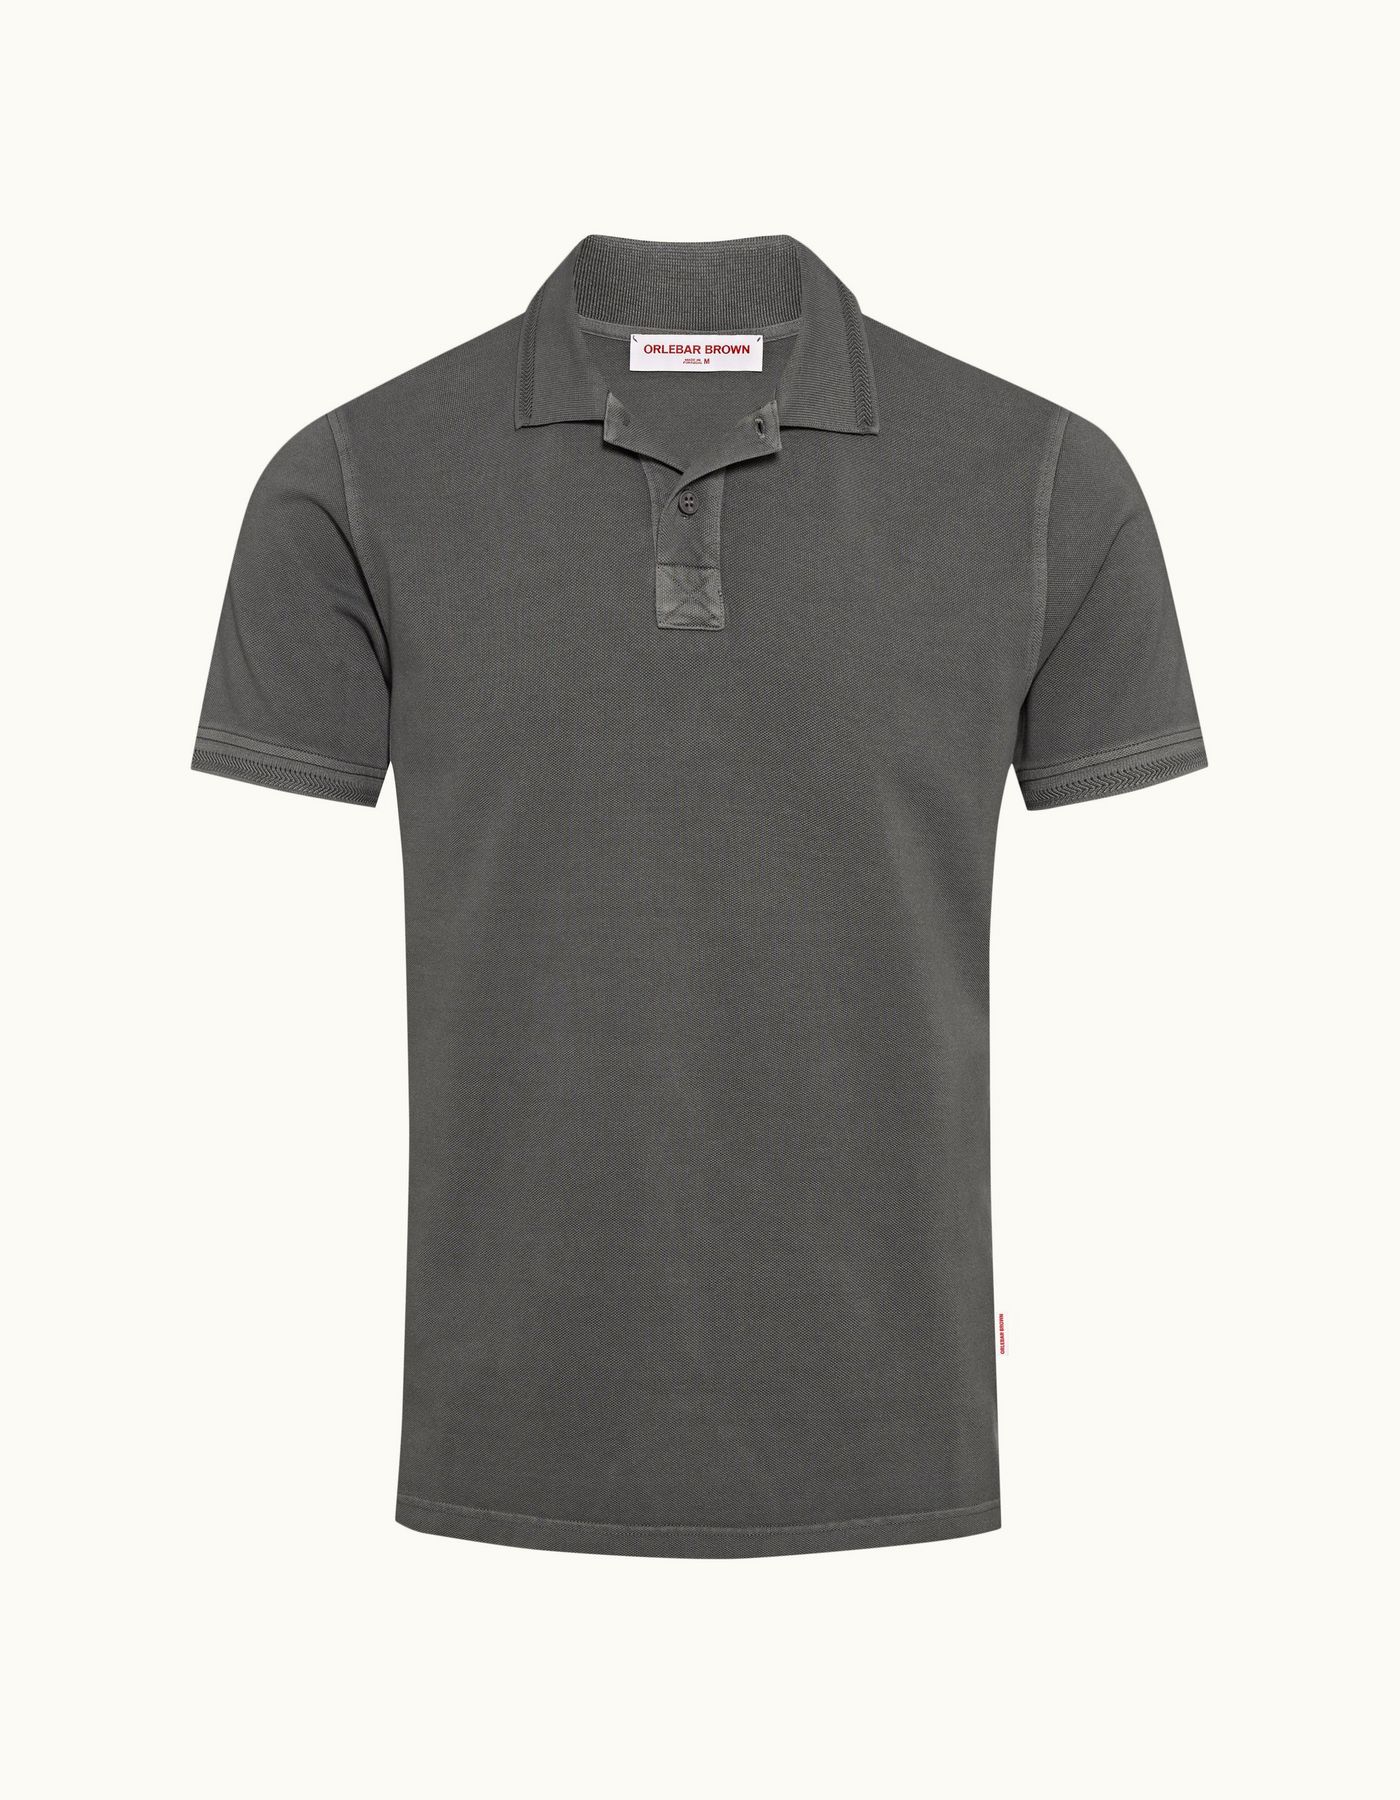 Jarrett - Mens Washed Mountain Grey Classic Fit Cotton Polo Shirt